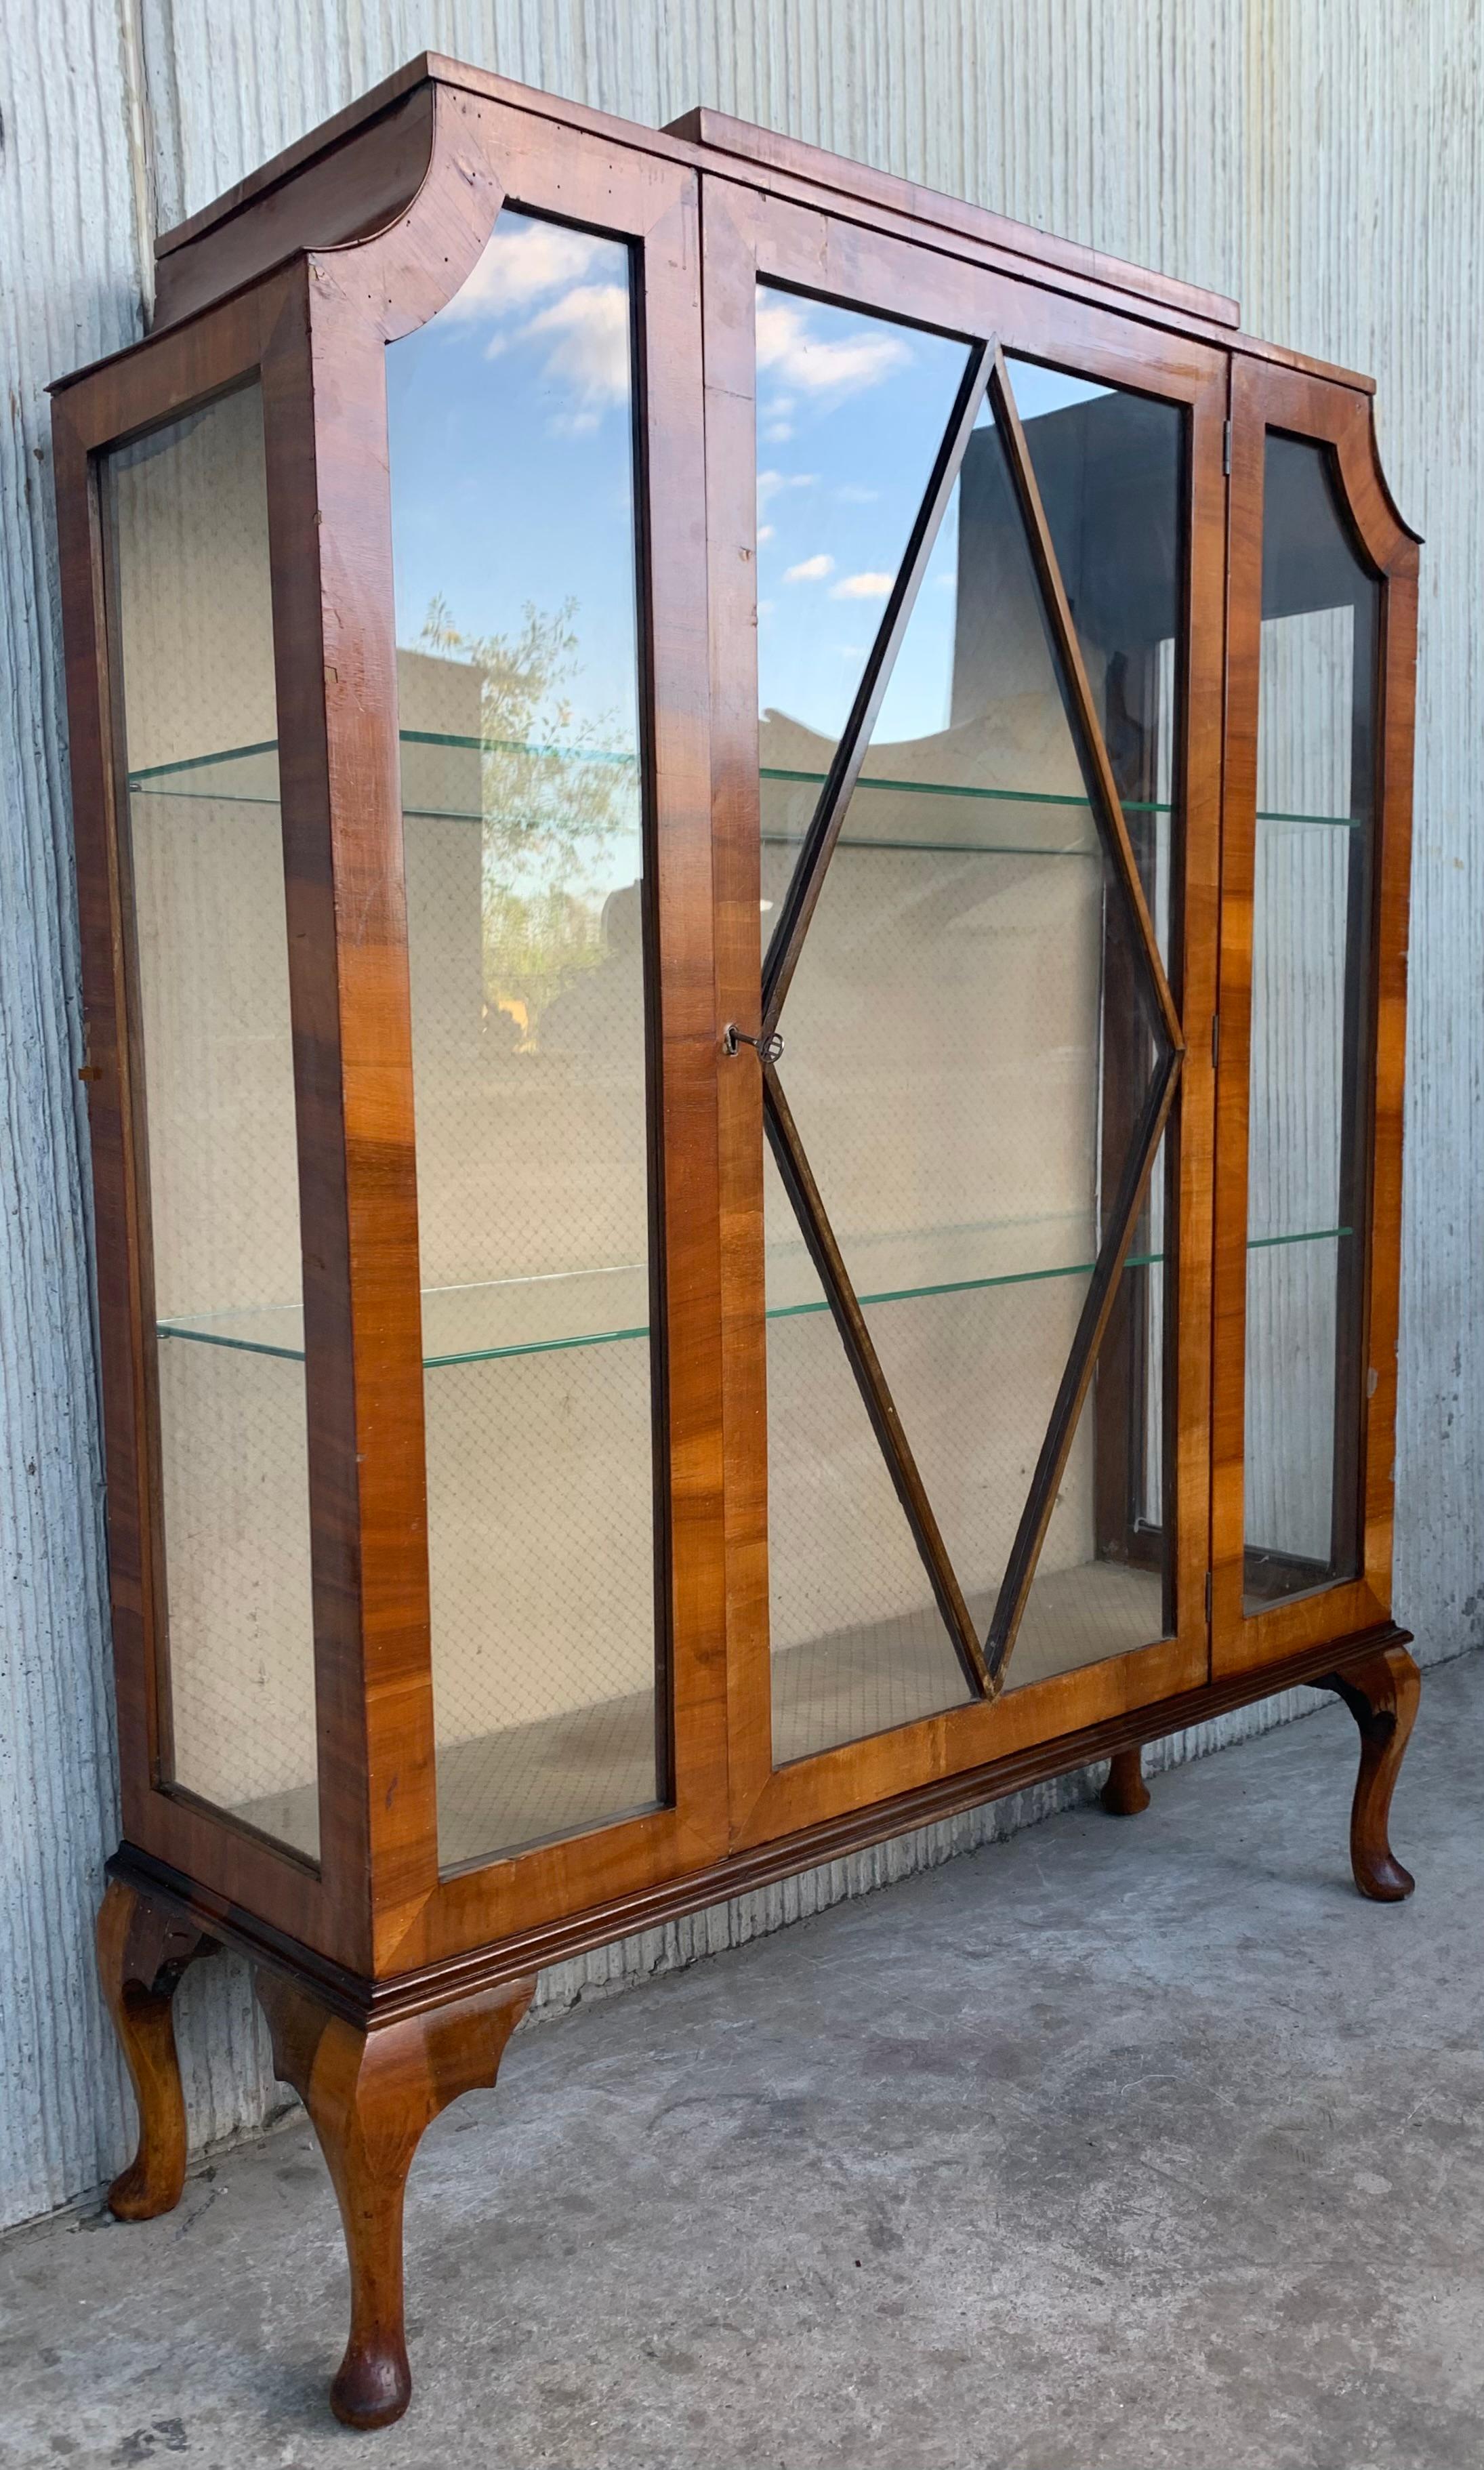 Walnut Art Deco Cathedral Display Cabinet with Cabriole Legs, Vitrine, circa 1930 For Sale